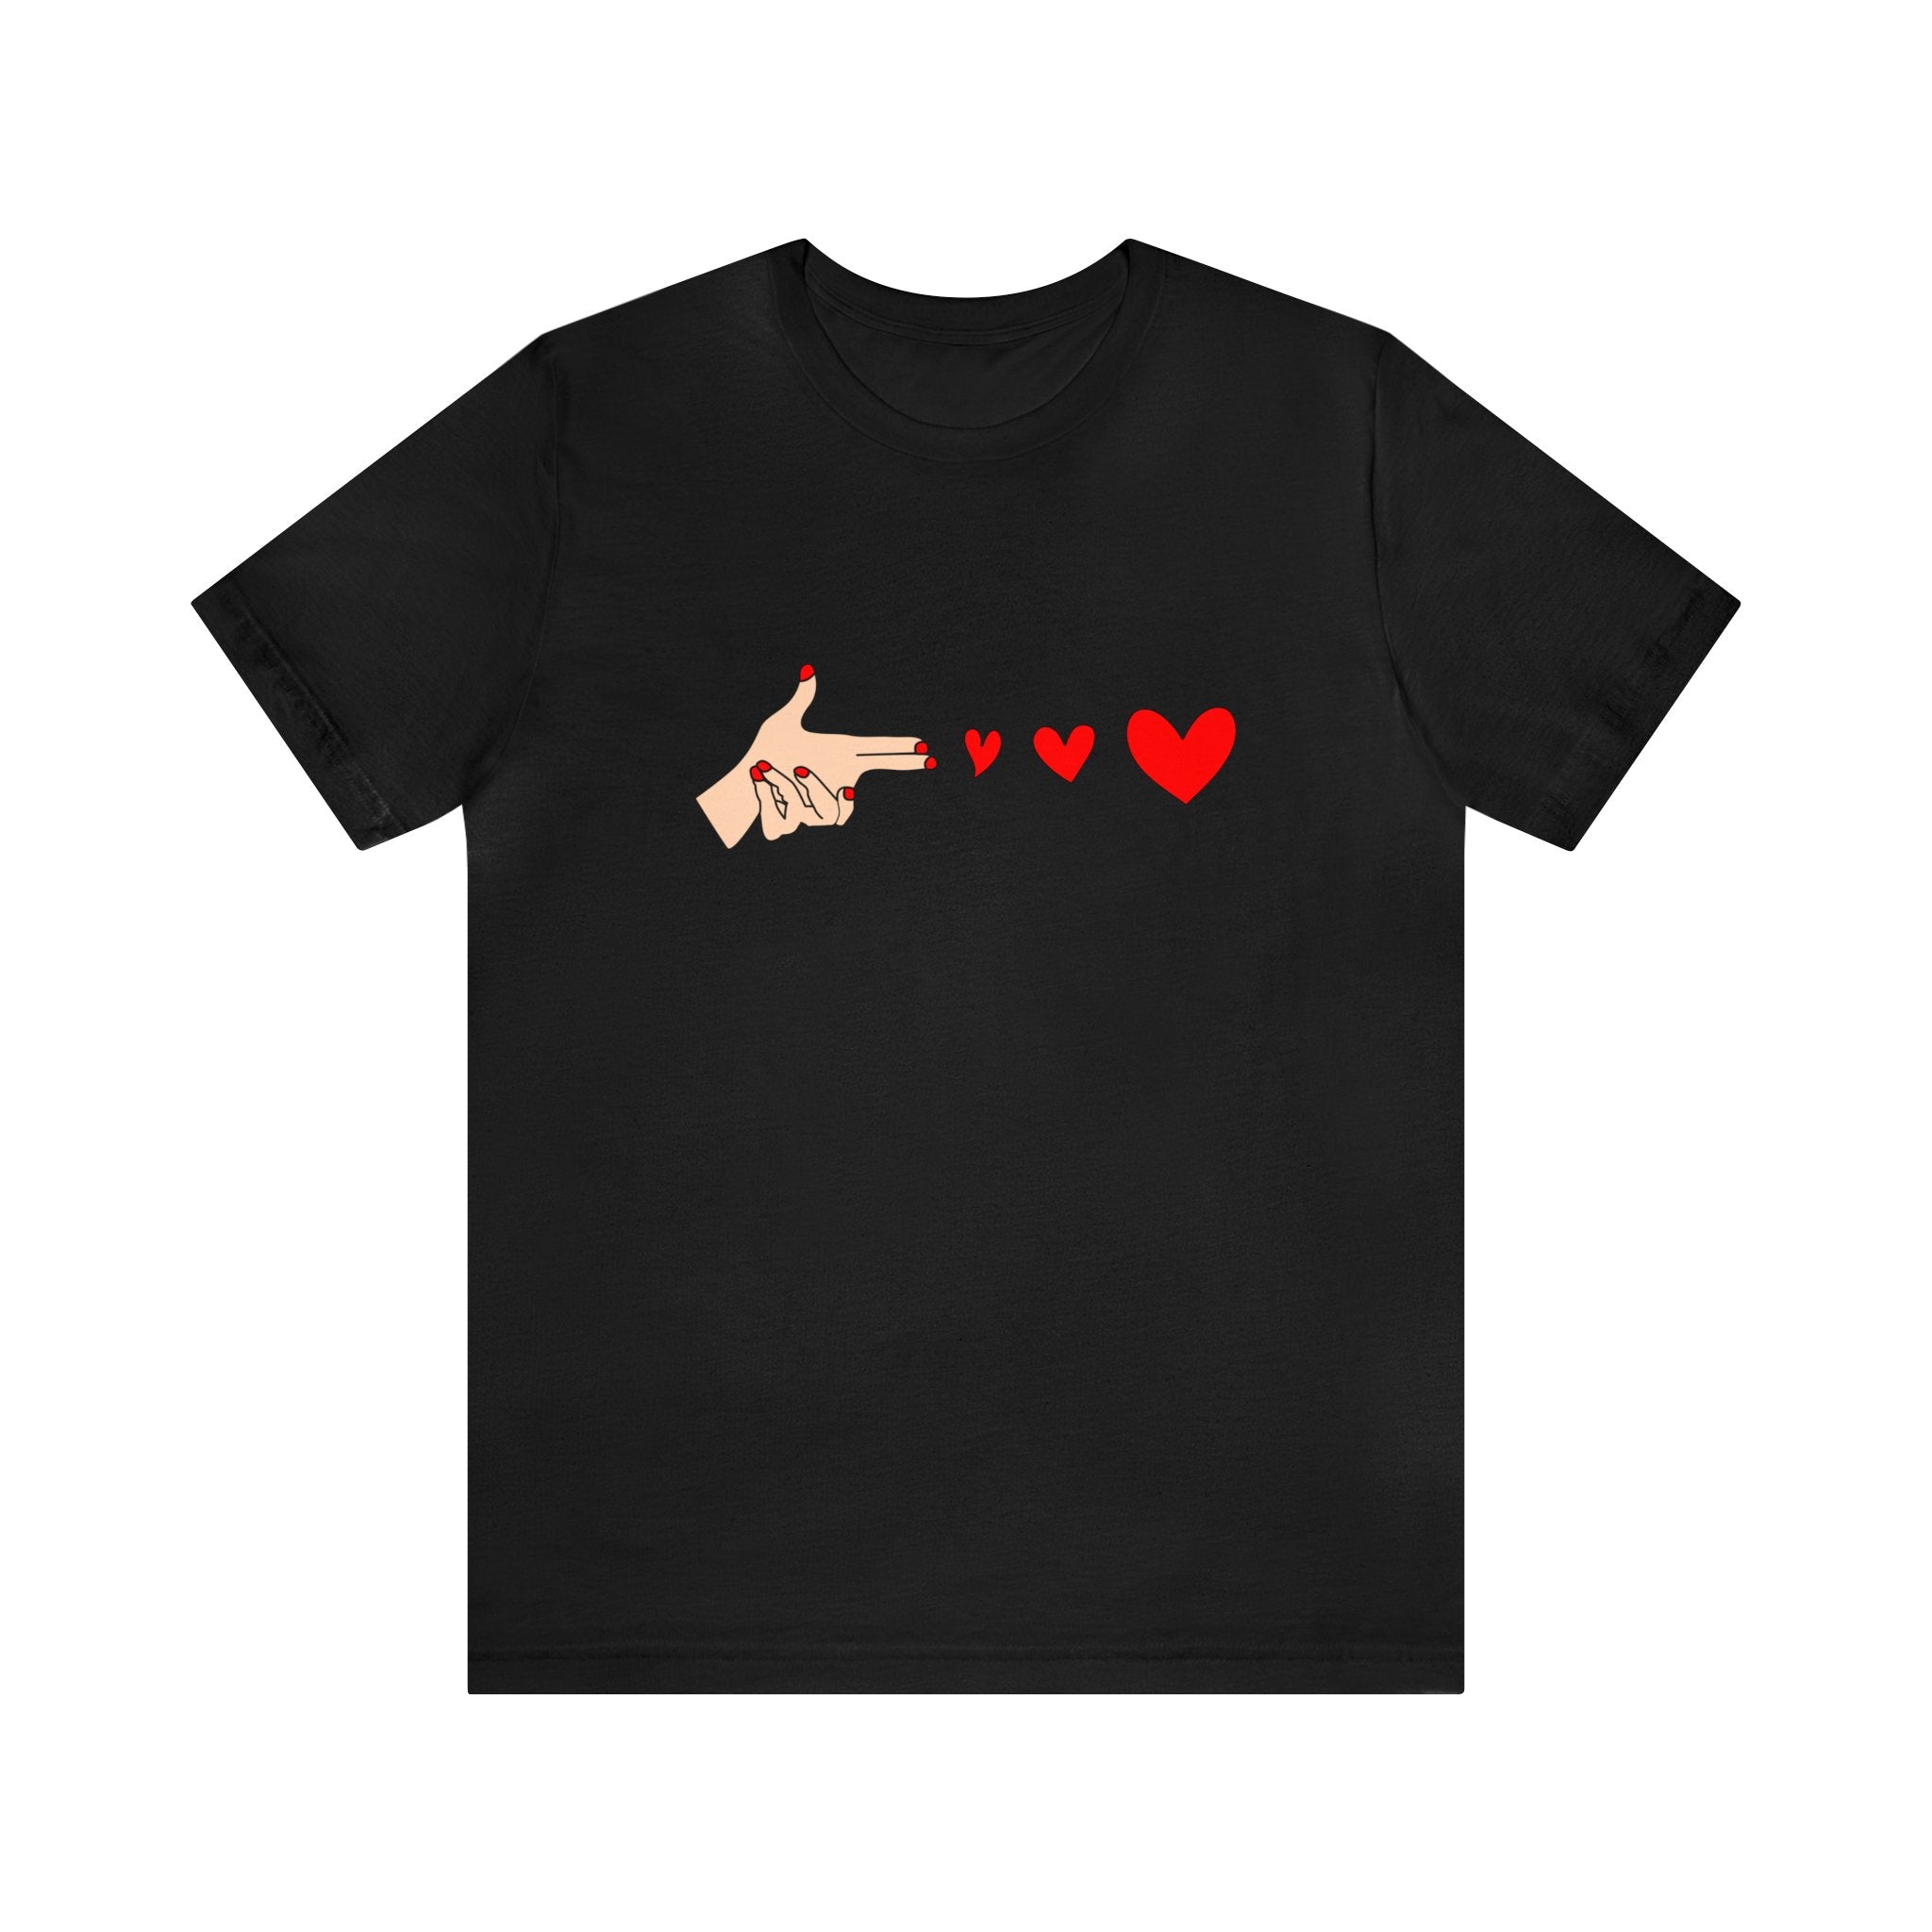 Make a statement with this Bang Bang T-Shirt, featuring a black t-shirt adorned with a heart and finger design that showcases your geeky side.